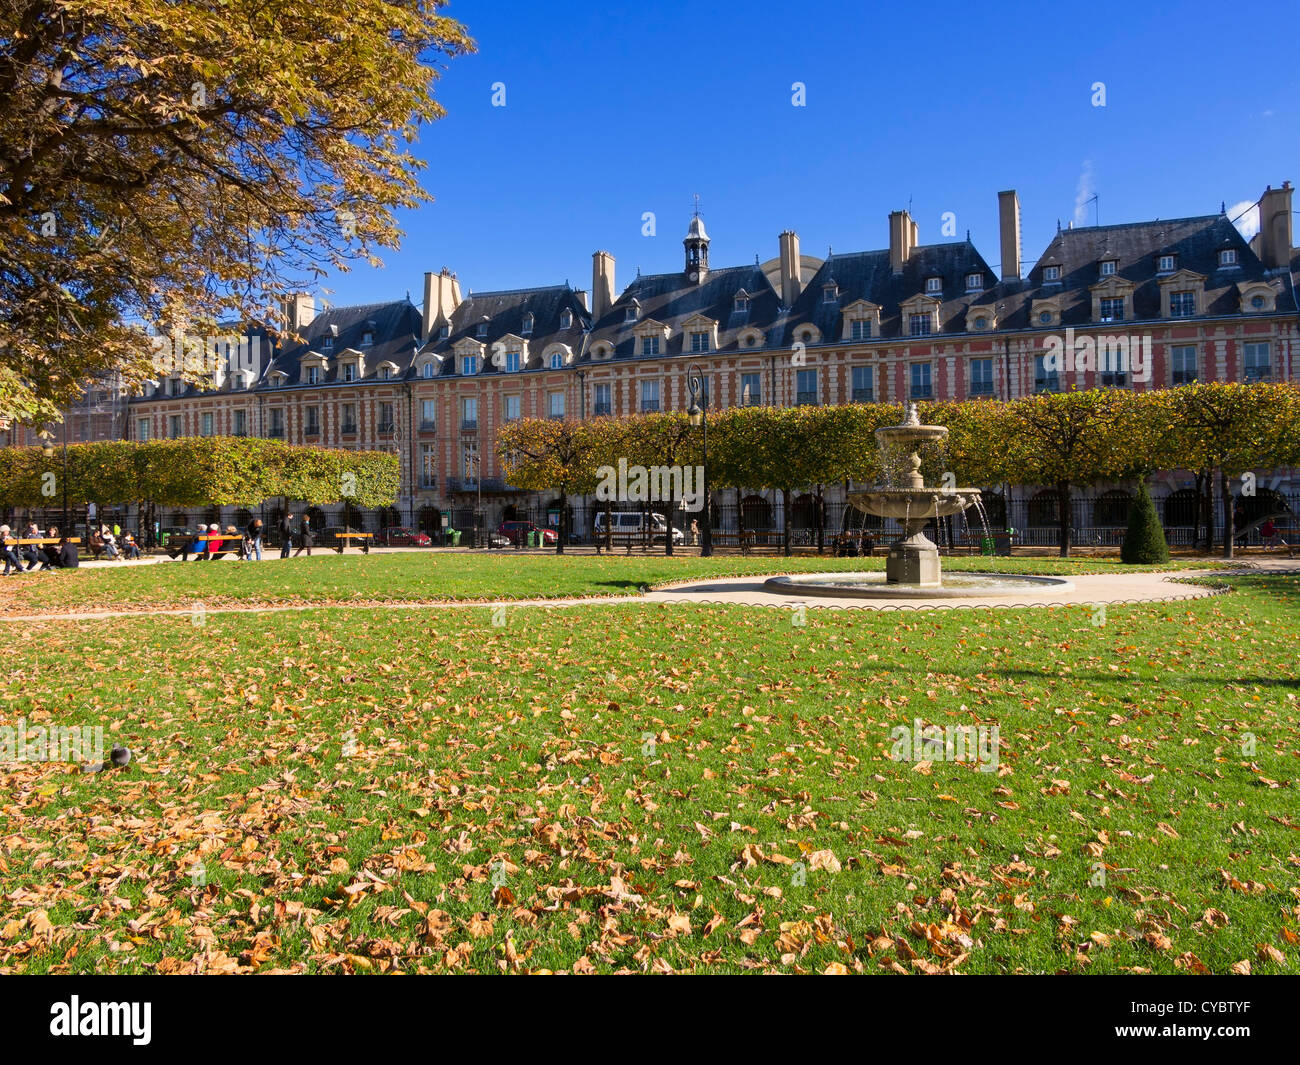 Autumn in Place des Vosges, Paris. This is the oldest planned square in Paris, with uniform houses lining a large central park. Stock Photo